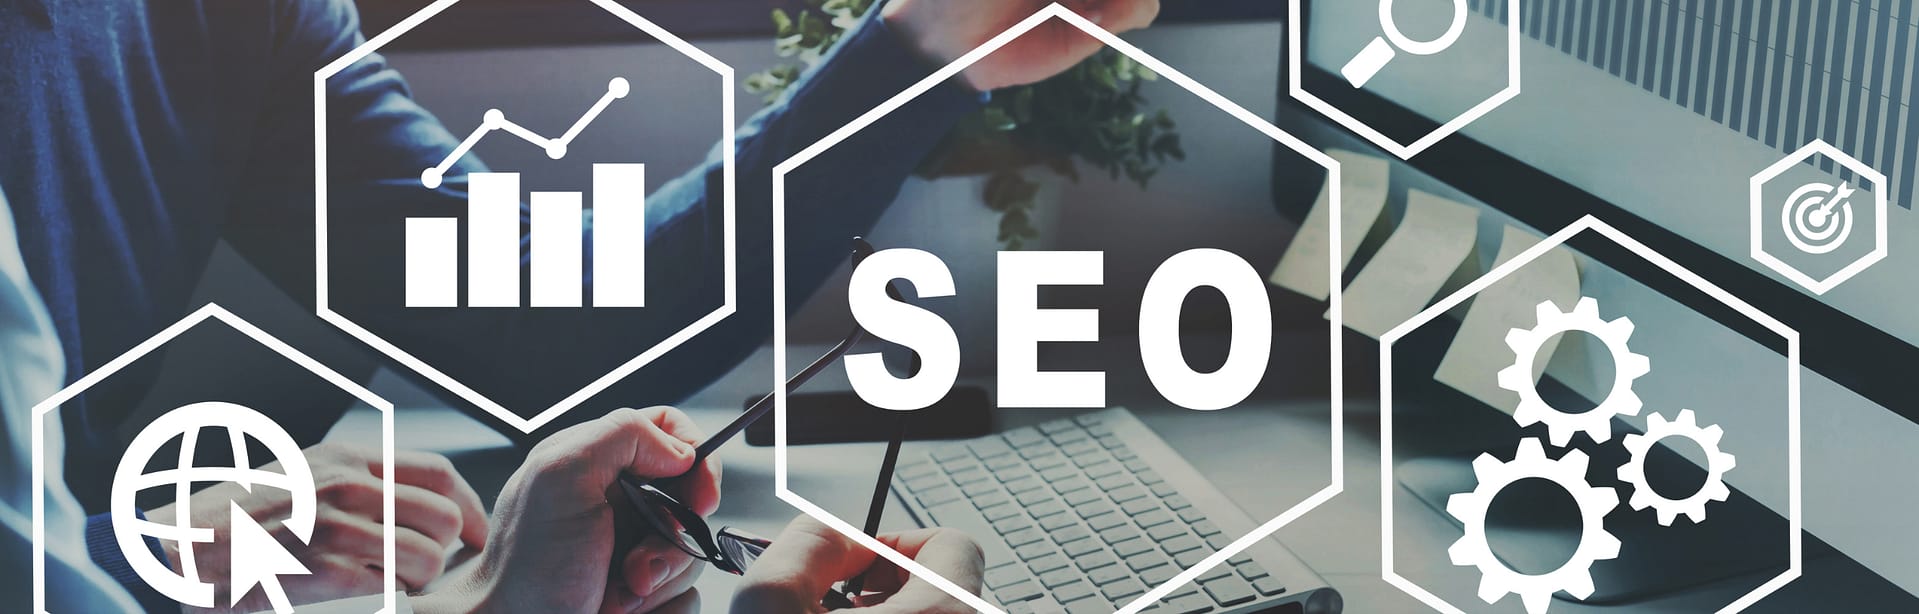 seo can lead to business success